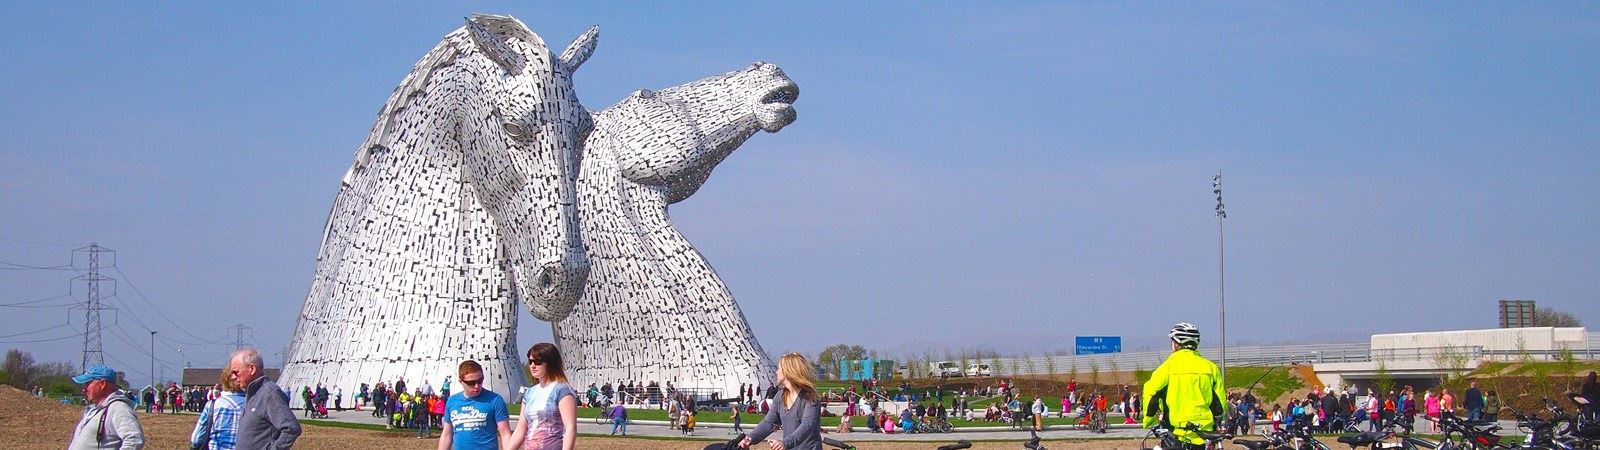 View of the Kelpies, Helix Park, Falkirk